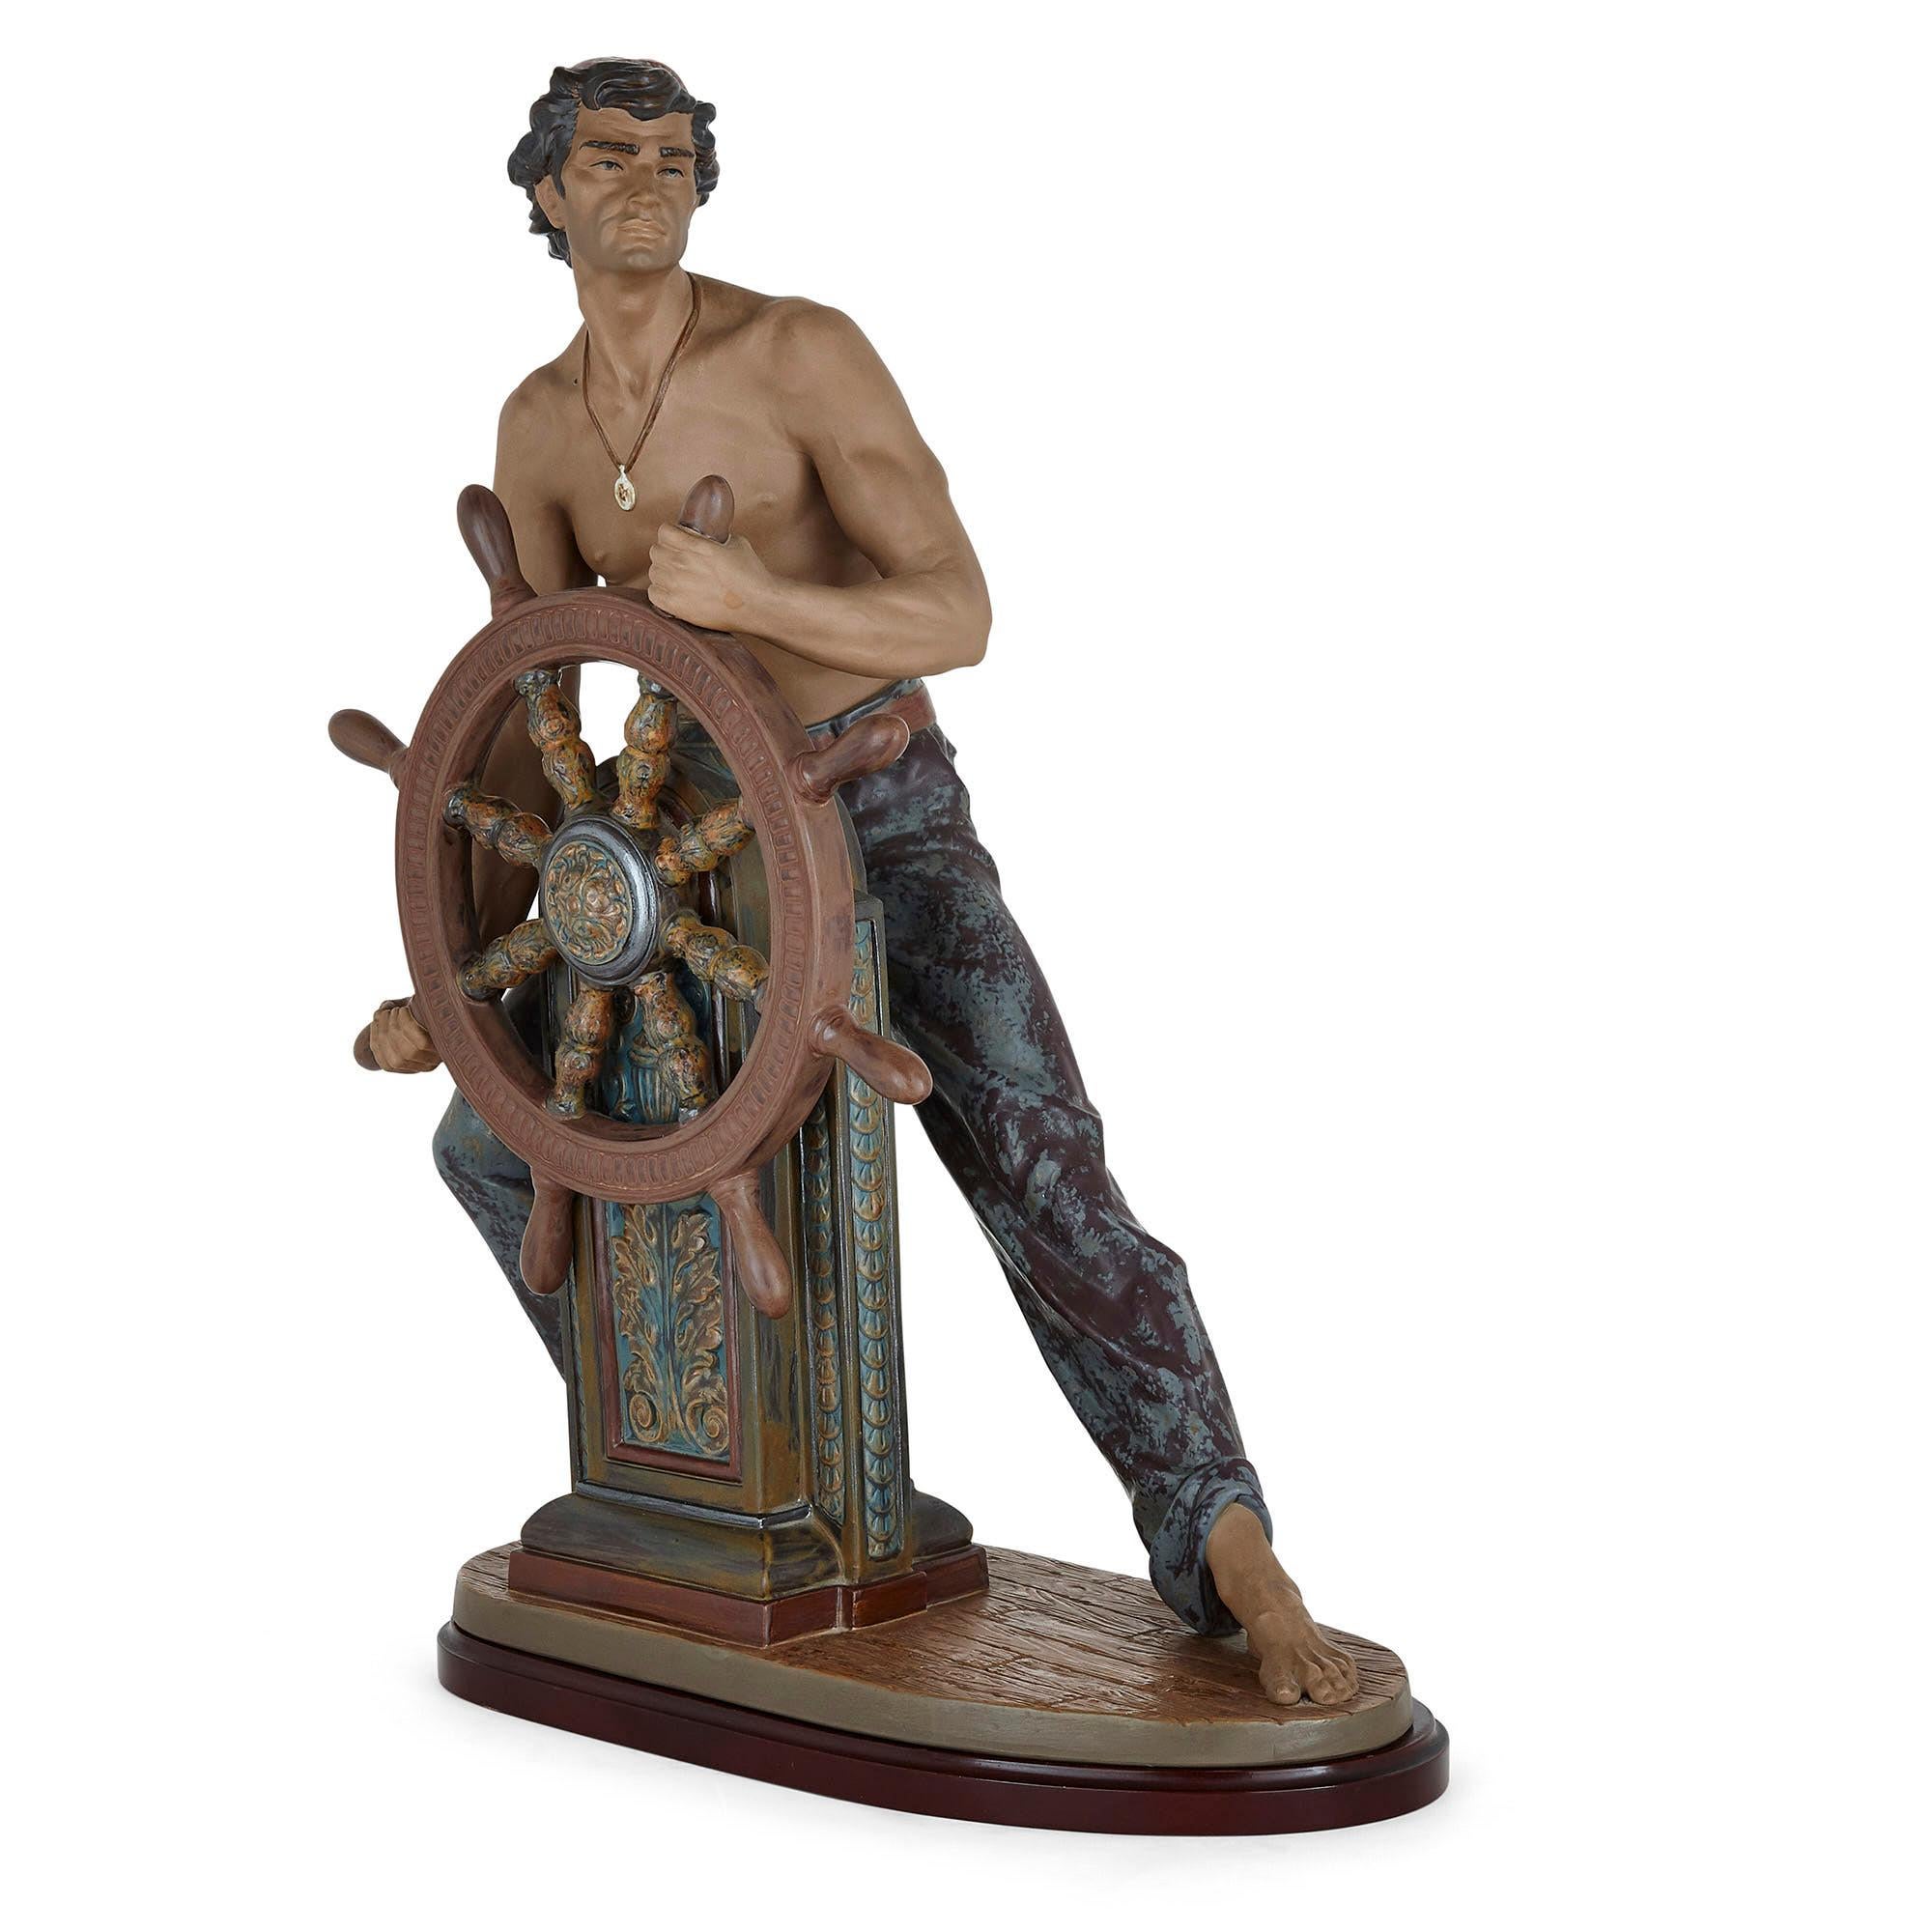 Glazed ceramic sculpture of a helmsman by Spanish maker Lladró
Spanish, 20th Century
Measures: Height 55cm, width 38cm, depth 20cm

This fine ceramic sculpture depicts a helmsman in heroic posture. The man stands with one leg outstretched and